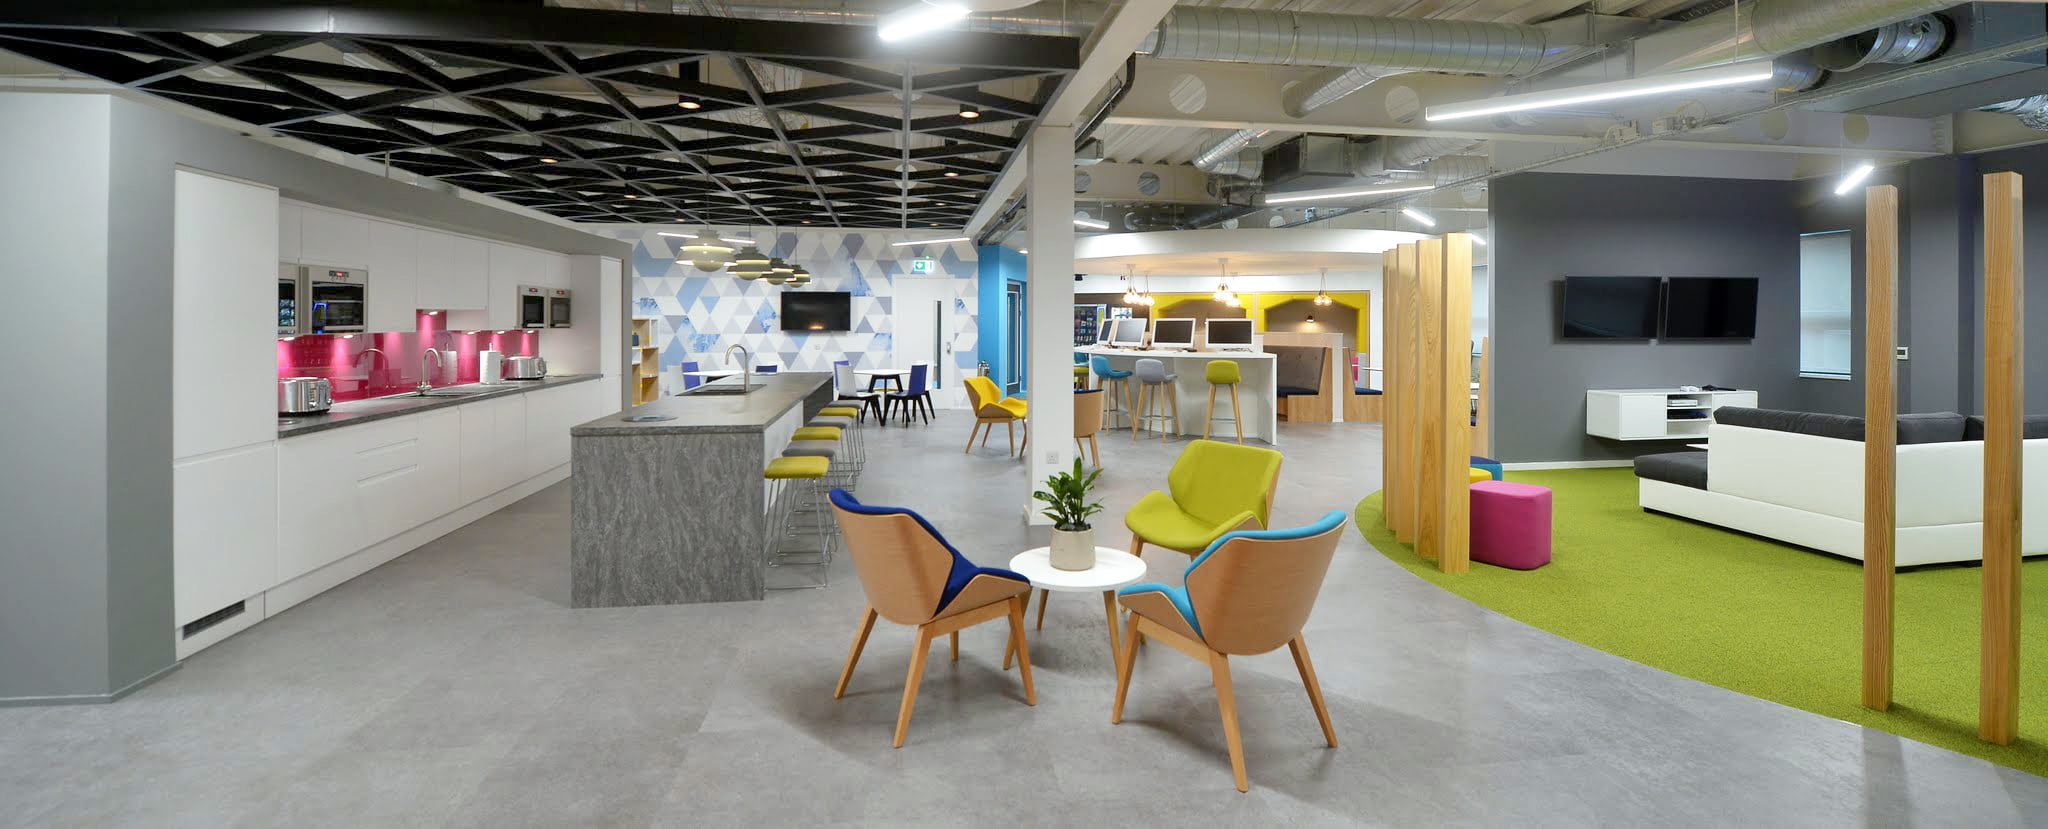 SmartSearch Office Design and Fit Out28